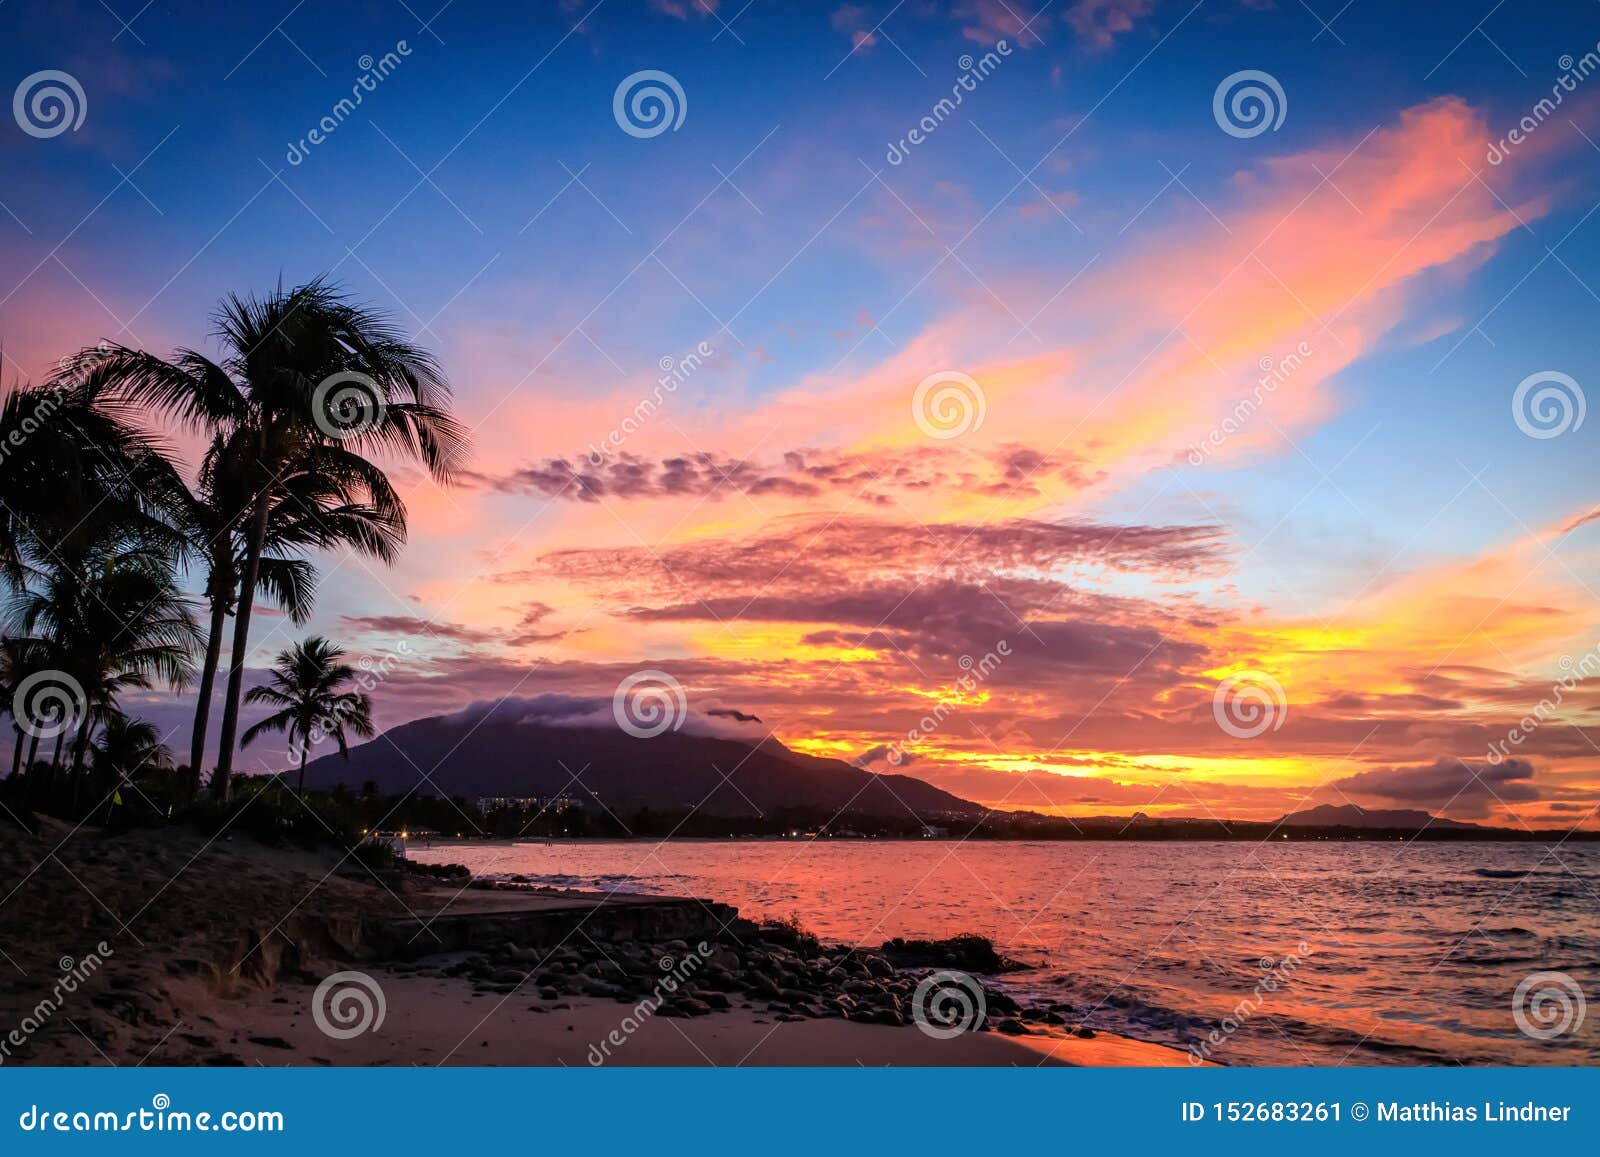 sunset in yellow and purple shades with a reflection in the sea, puerto plata, dominican republic, caribbean